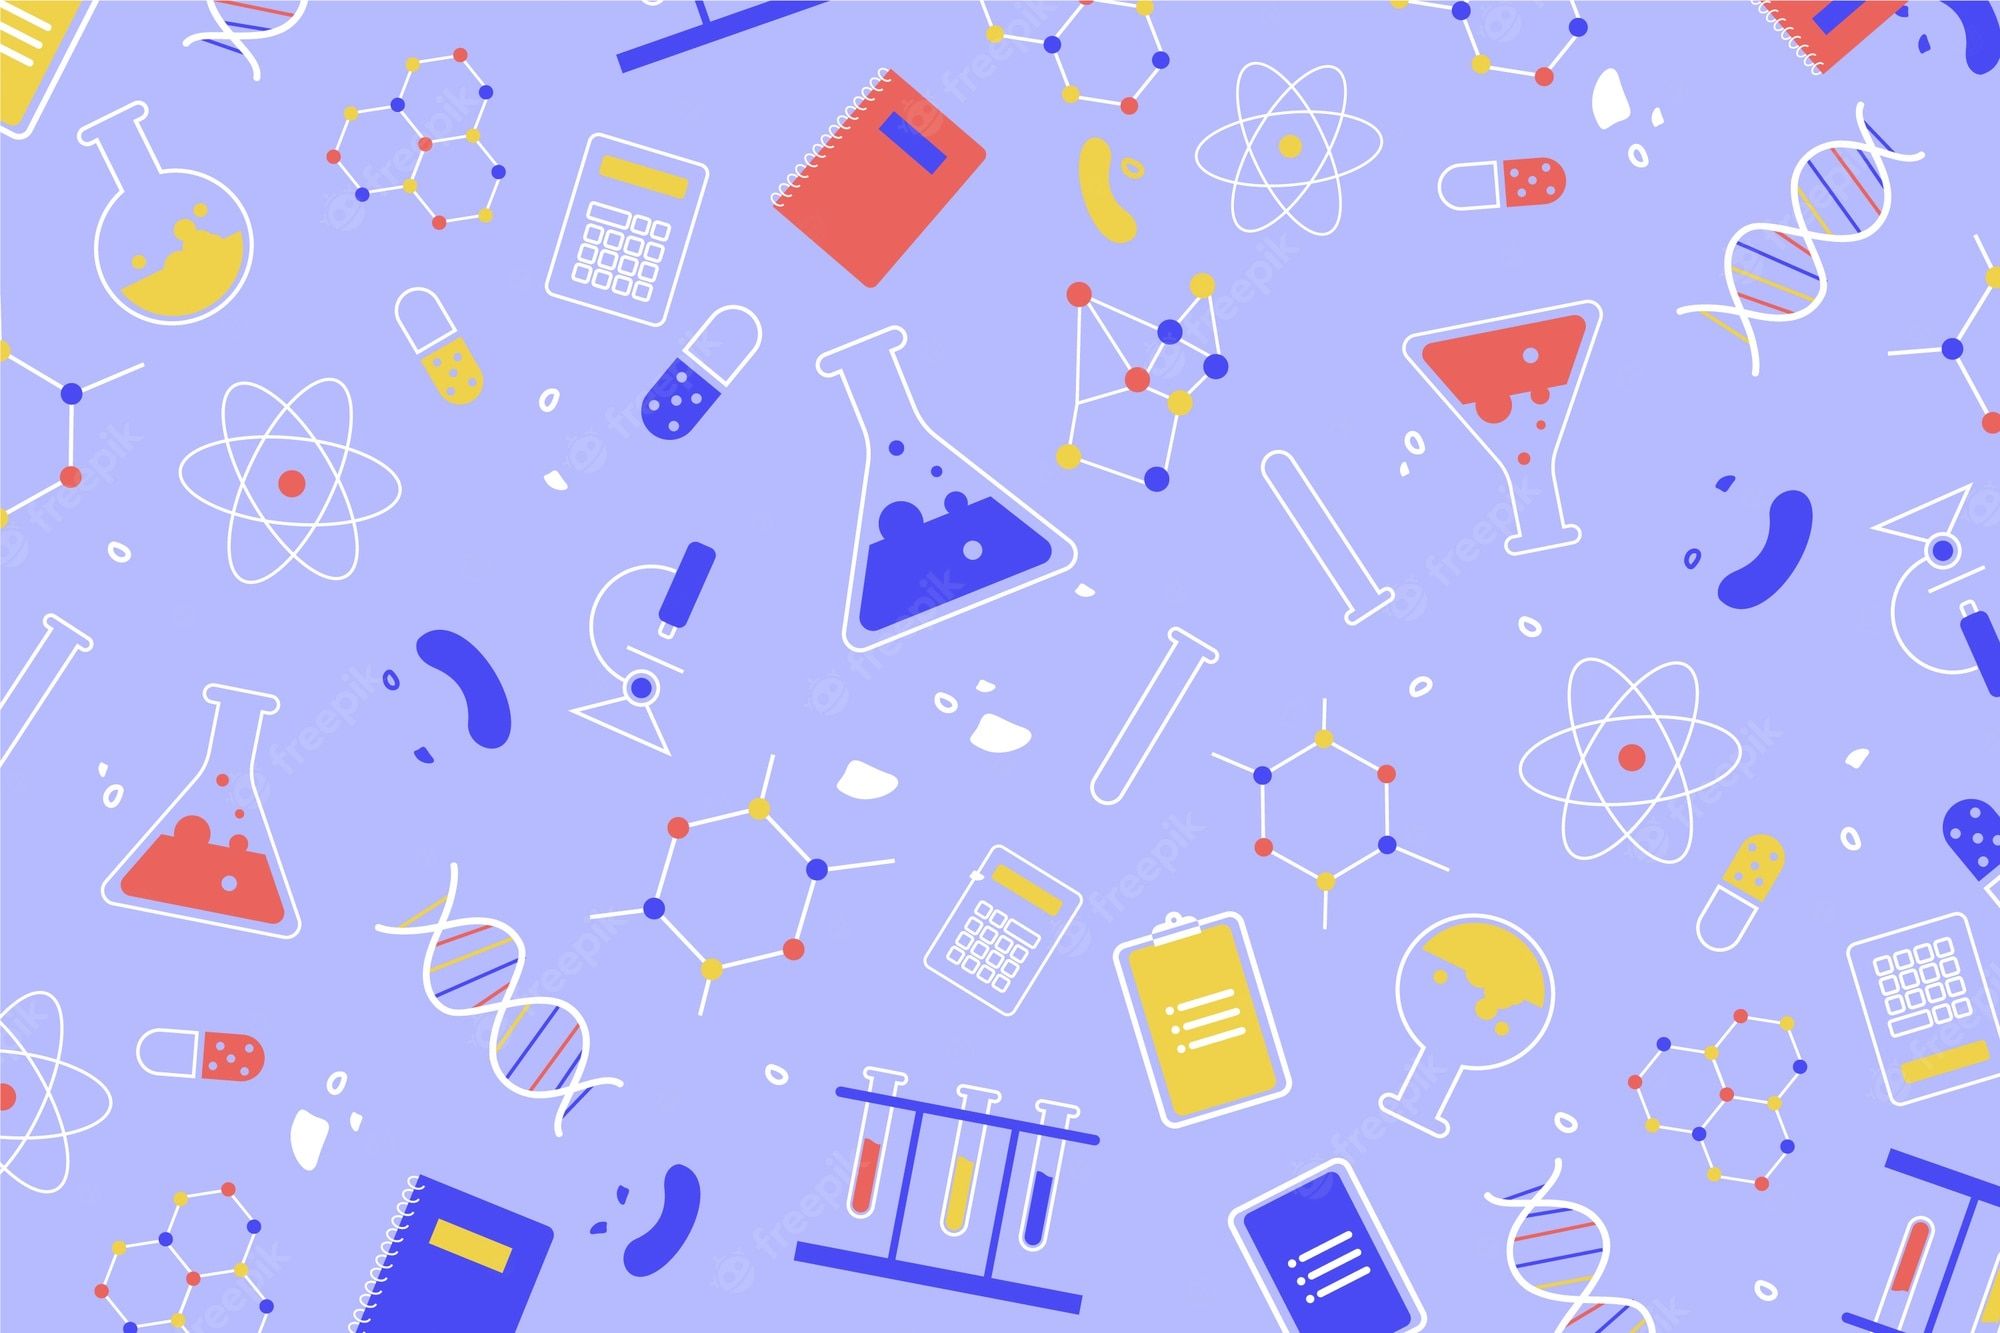 A pattern of science and chemistry icons including test tubes, beakers, a formula, a DNA strand, and a periodic table. - Science